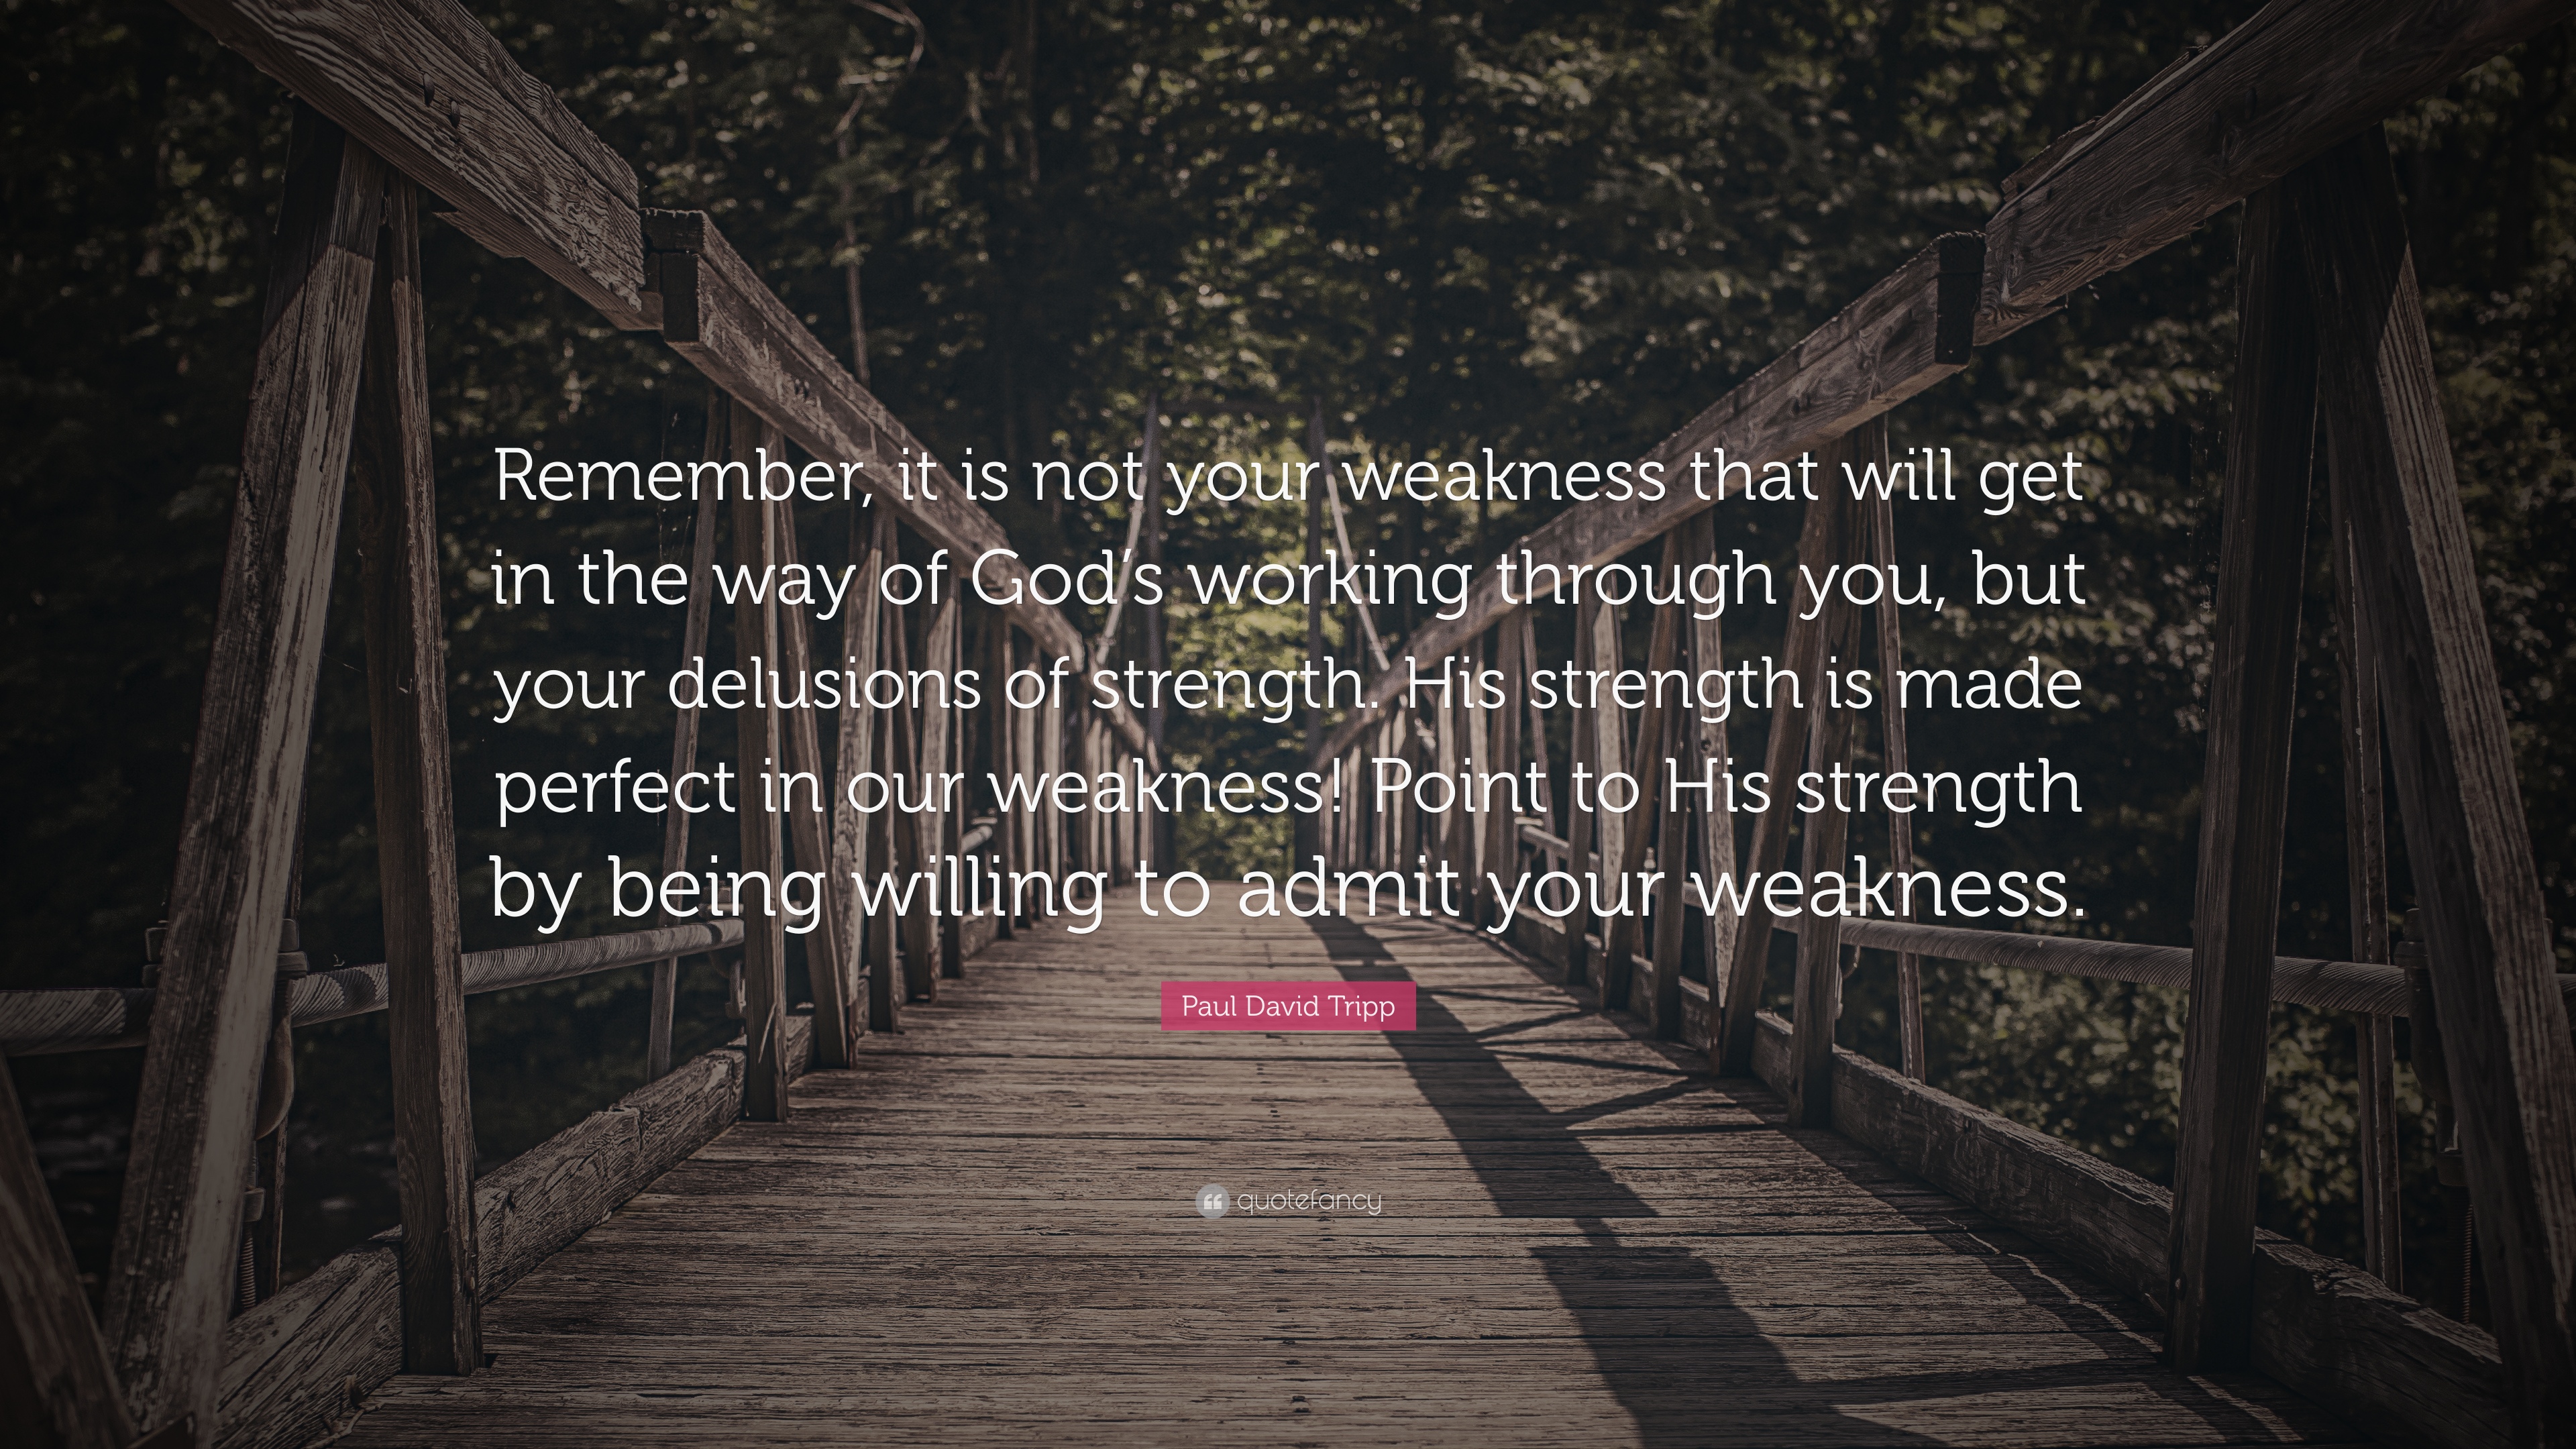 Weakness and strength